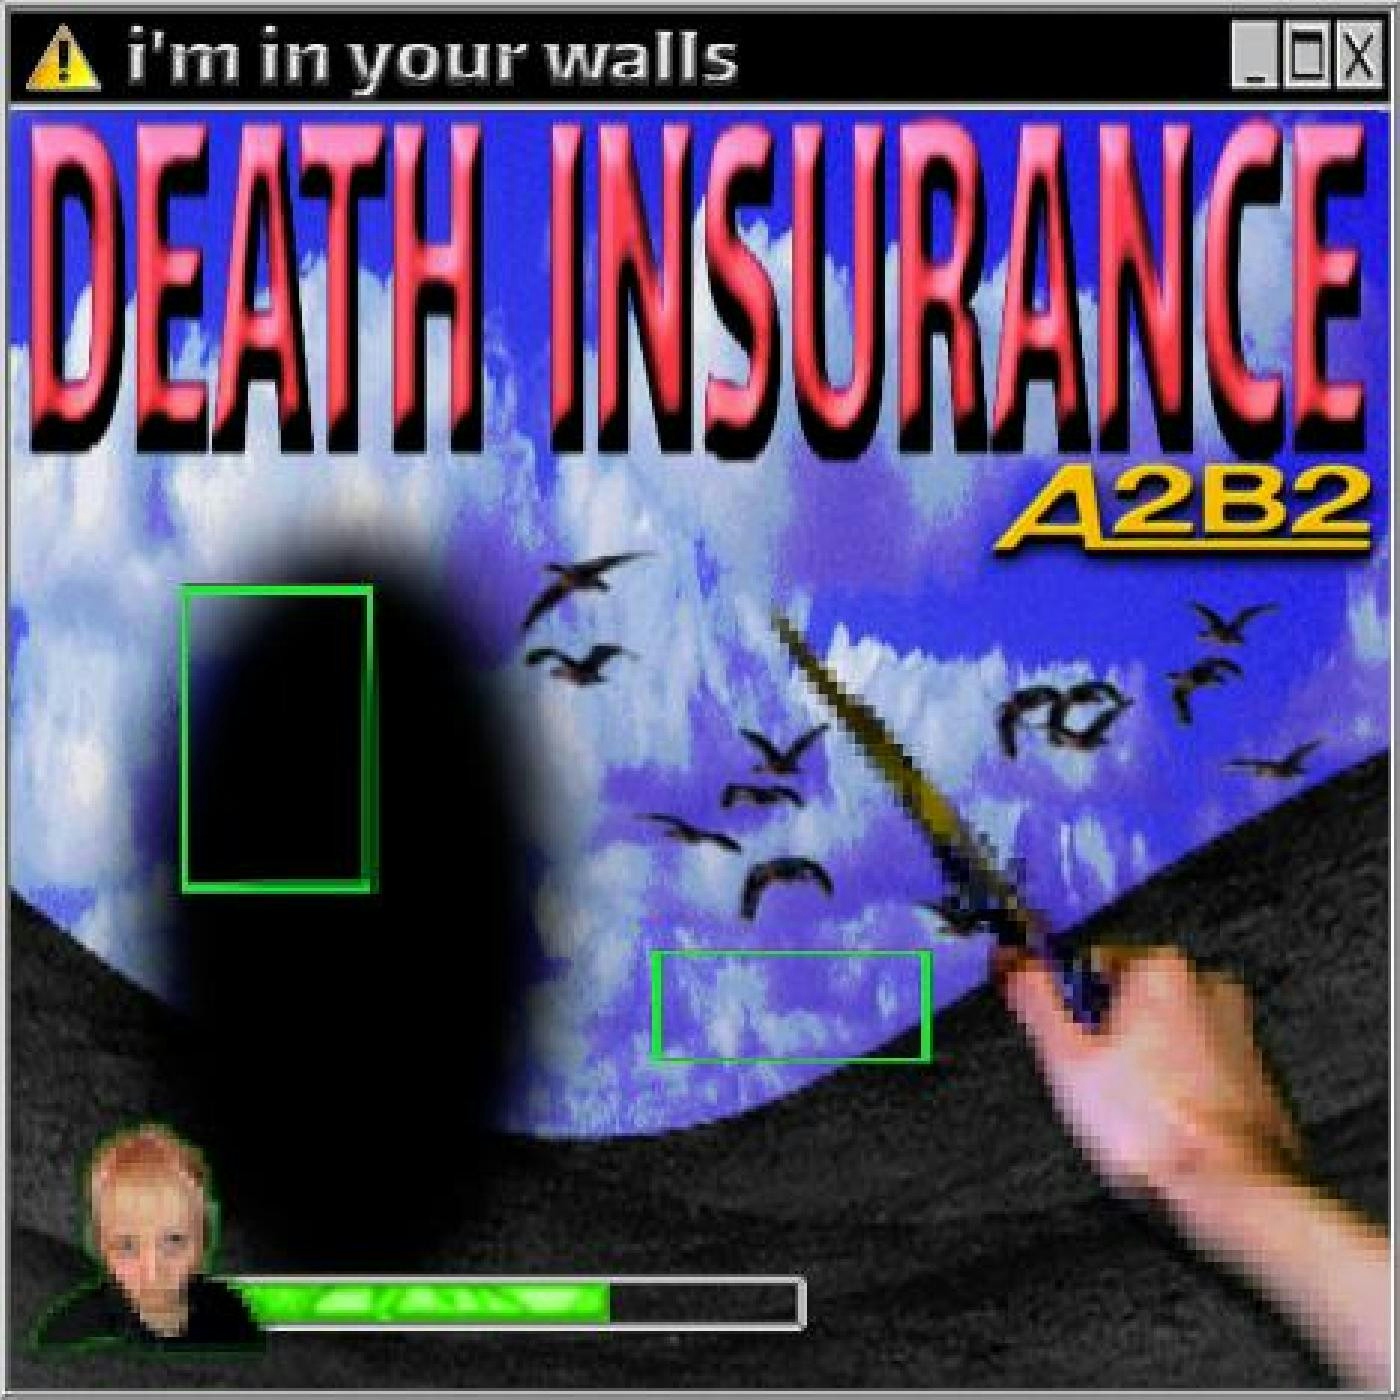 Album artwork for I'm In Your Walls by Death Insurance